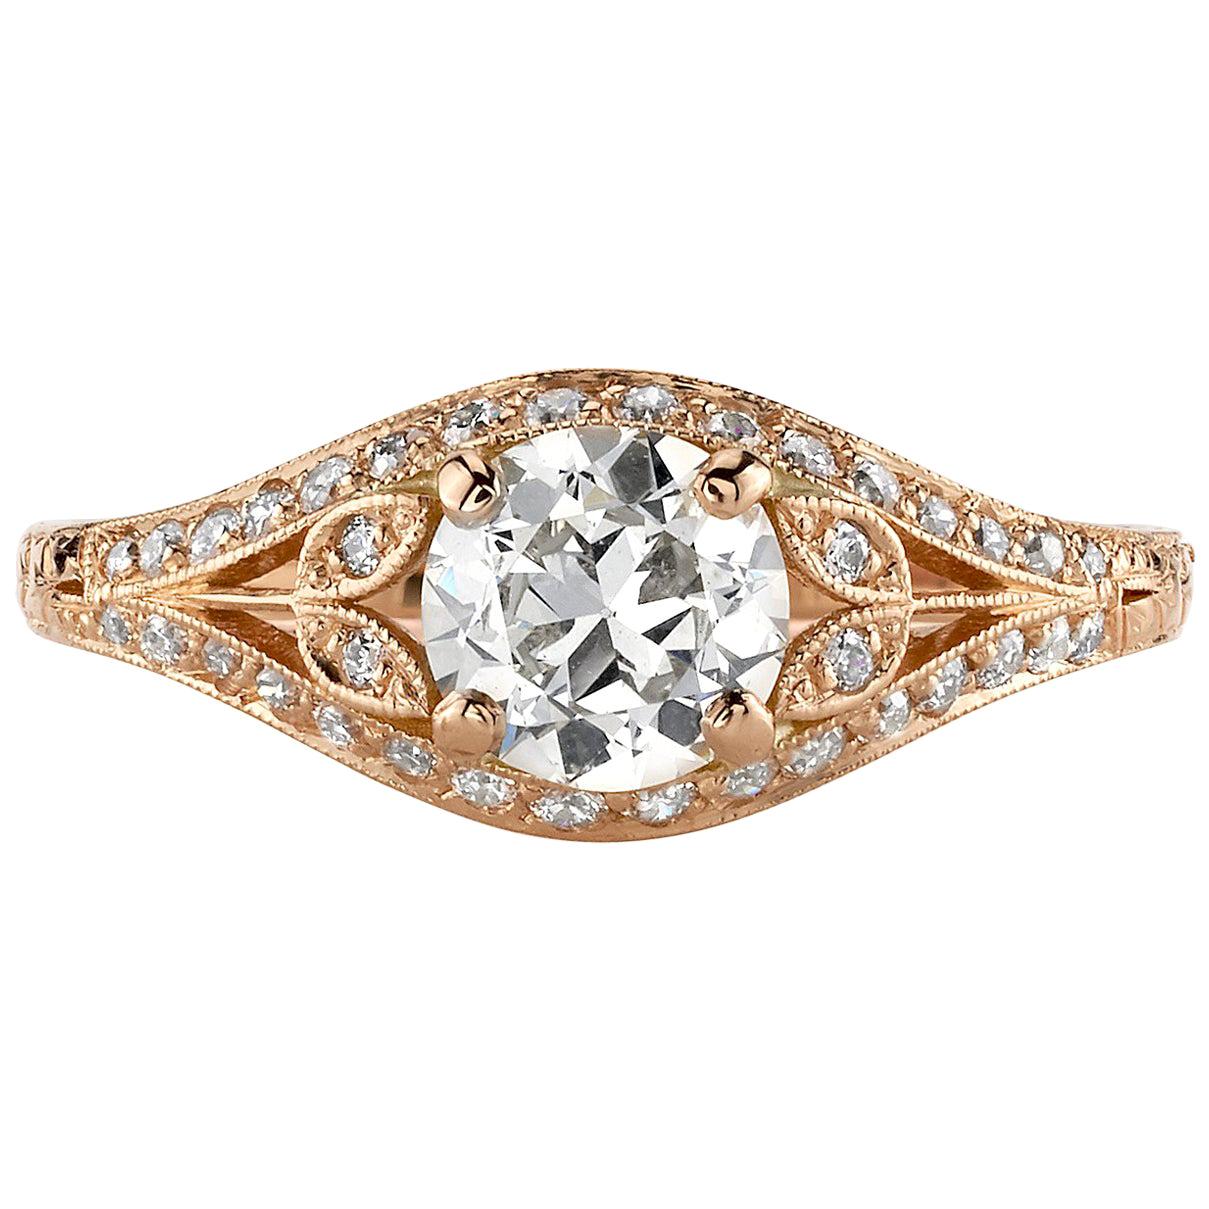 Handcrafted Chloe Old European Cut Diamond Ring by Single Stone